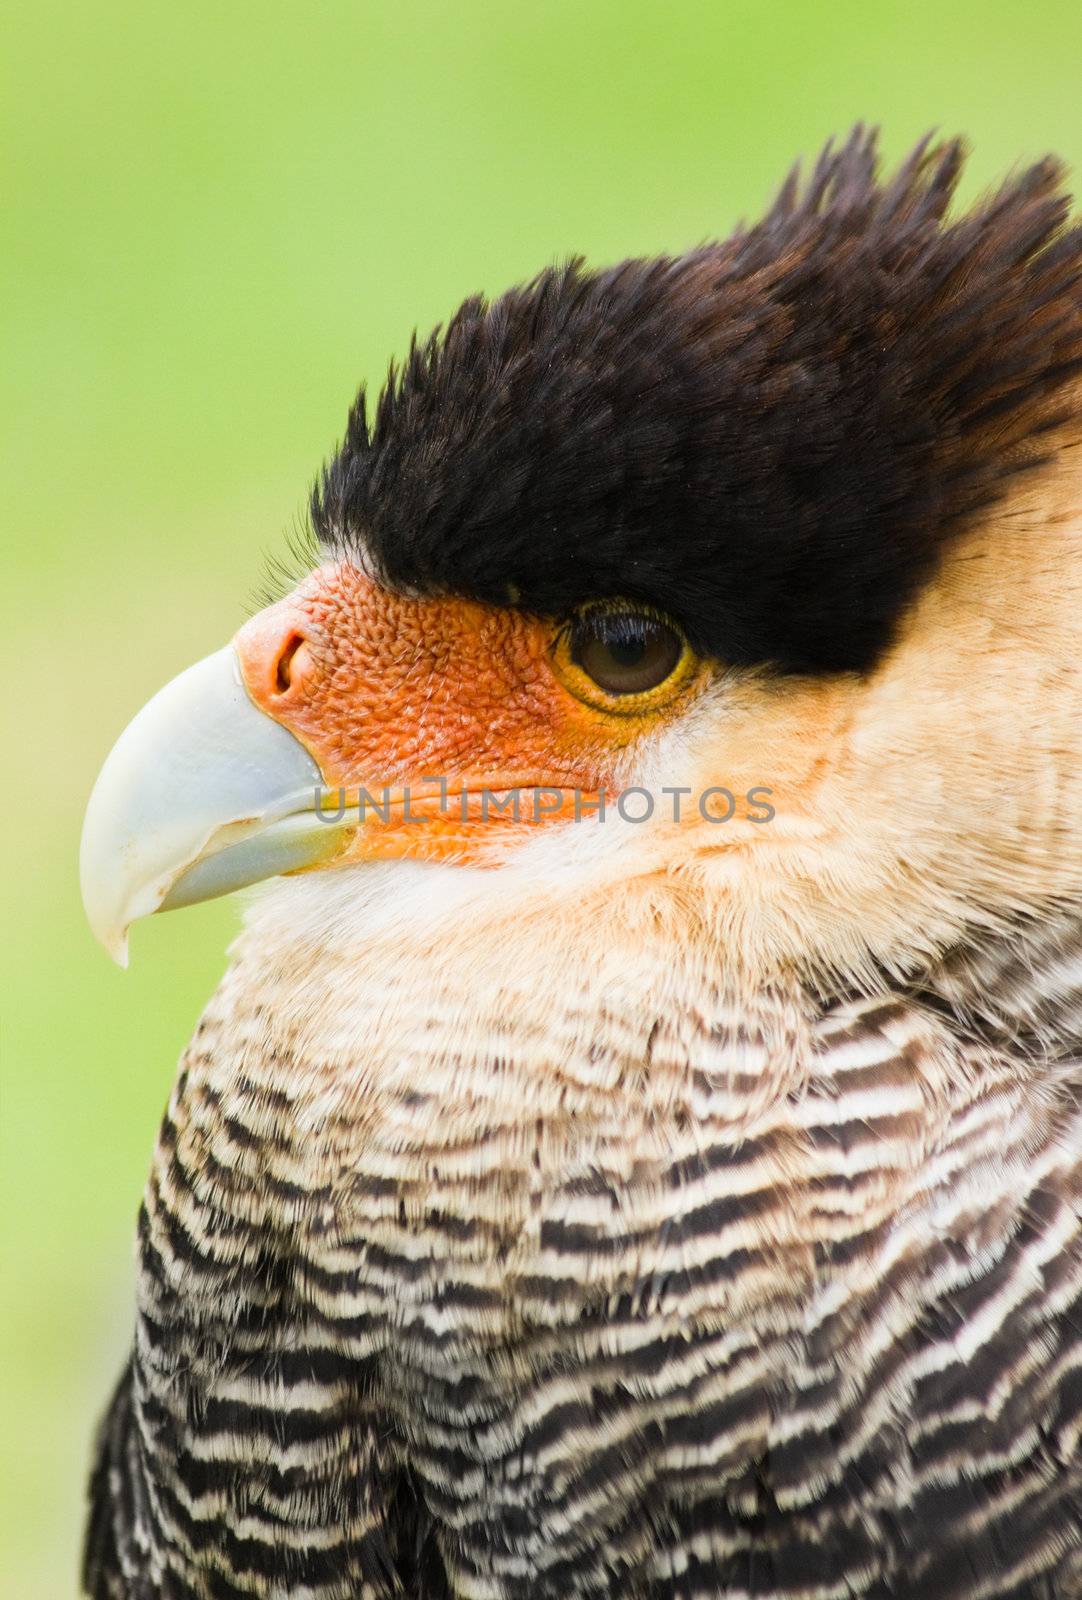 Caracara in side angle view by Colette